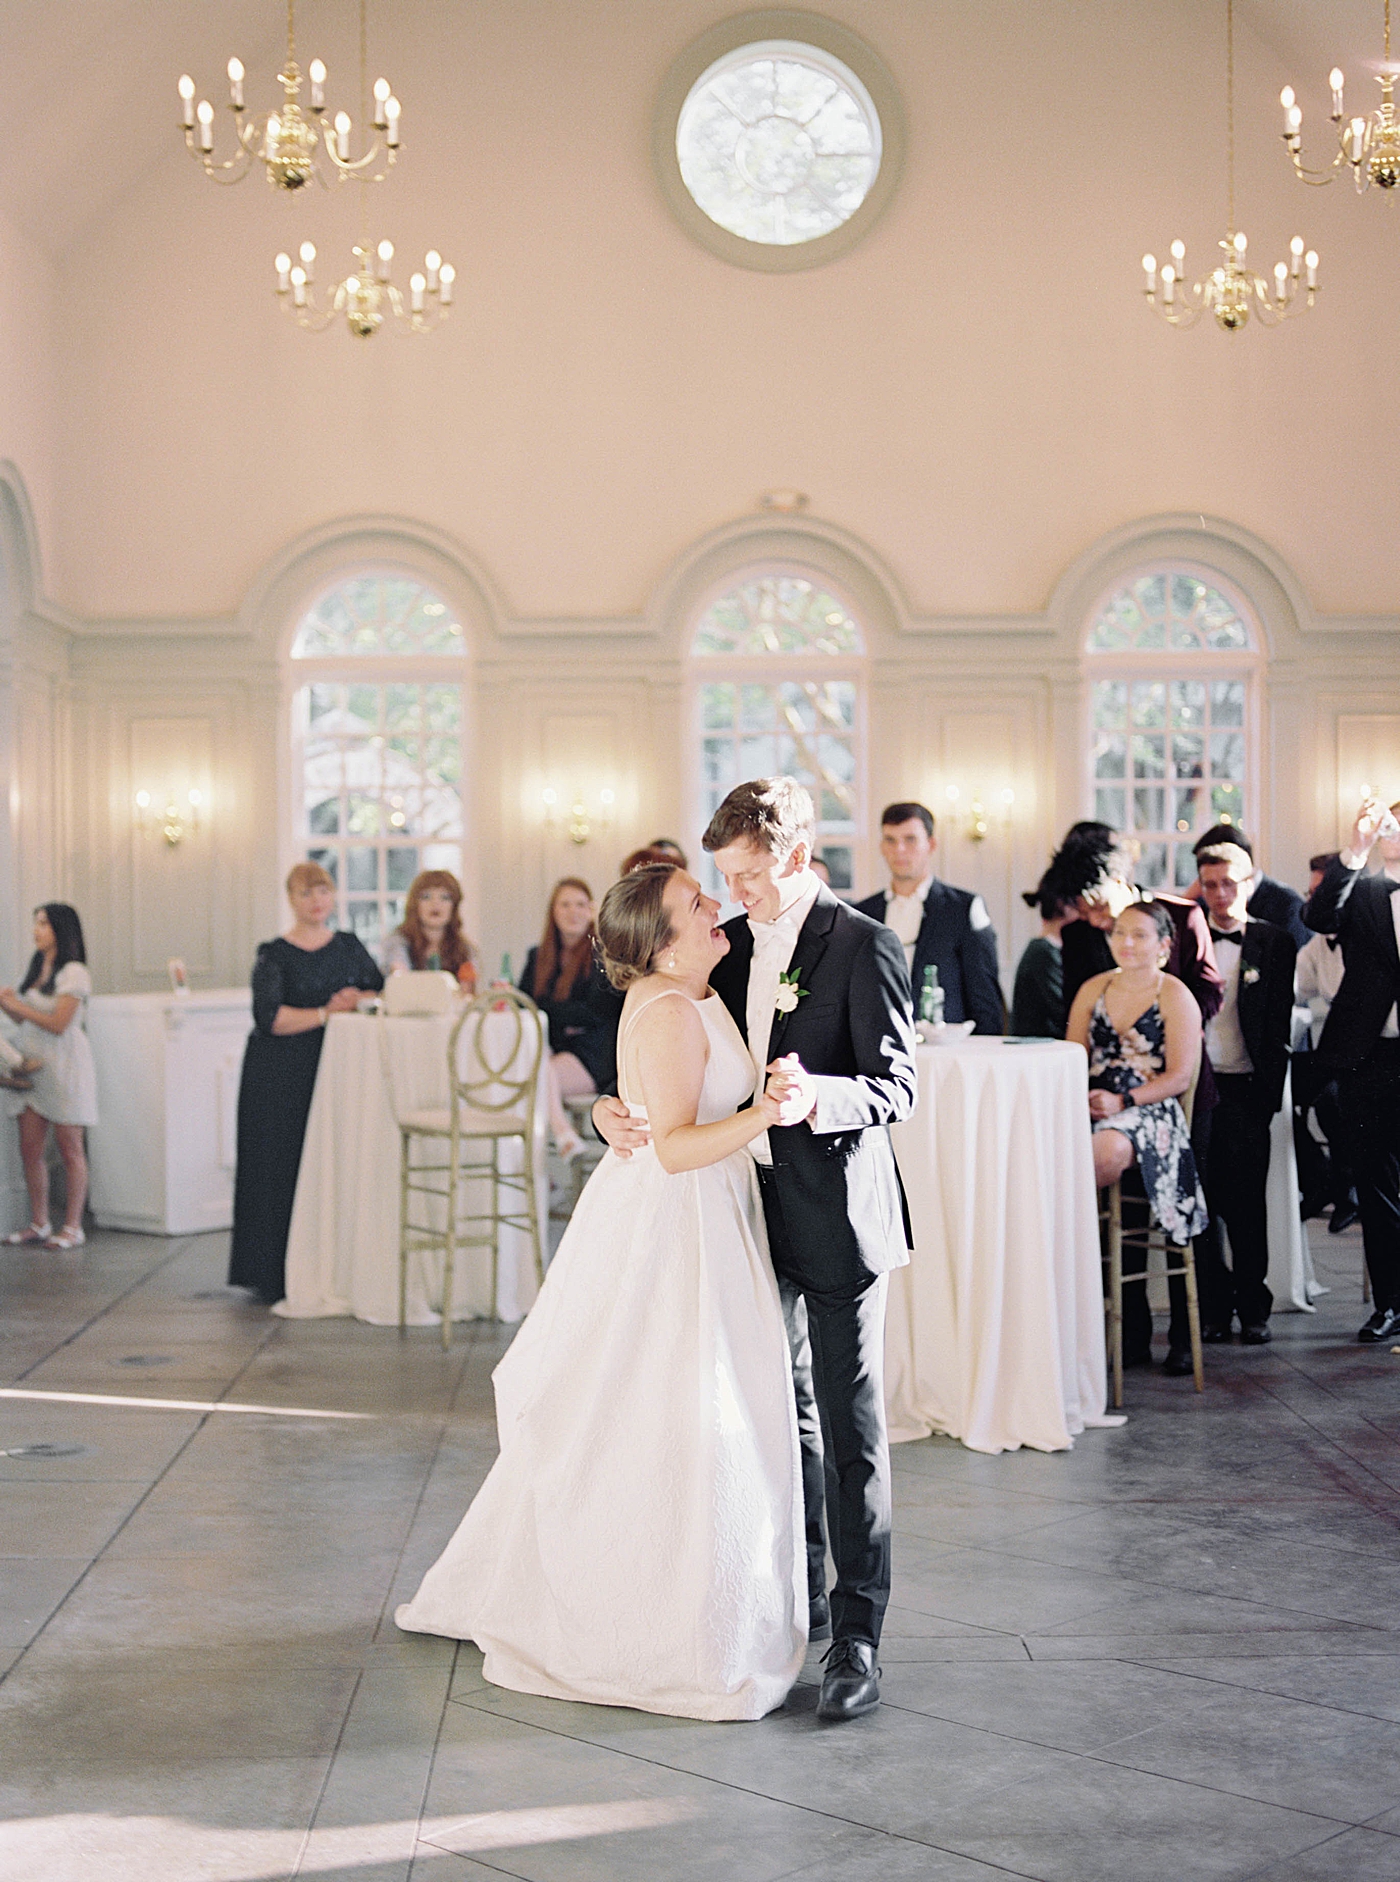 Bride and groom first dance | Carters Event Co